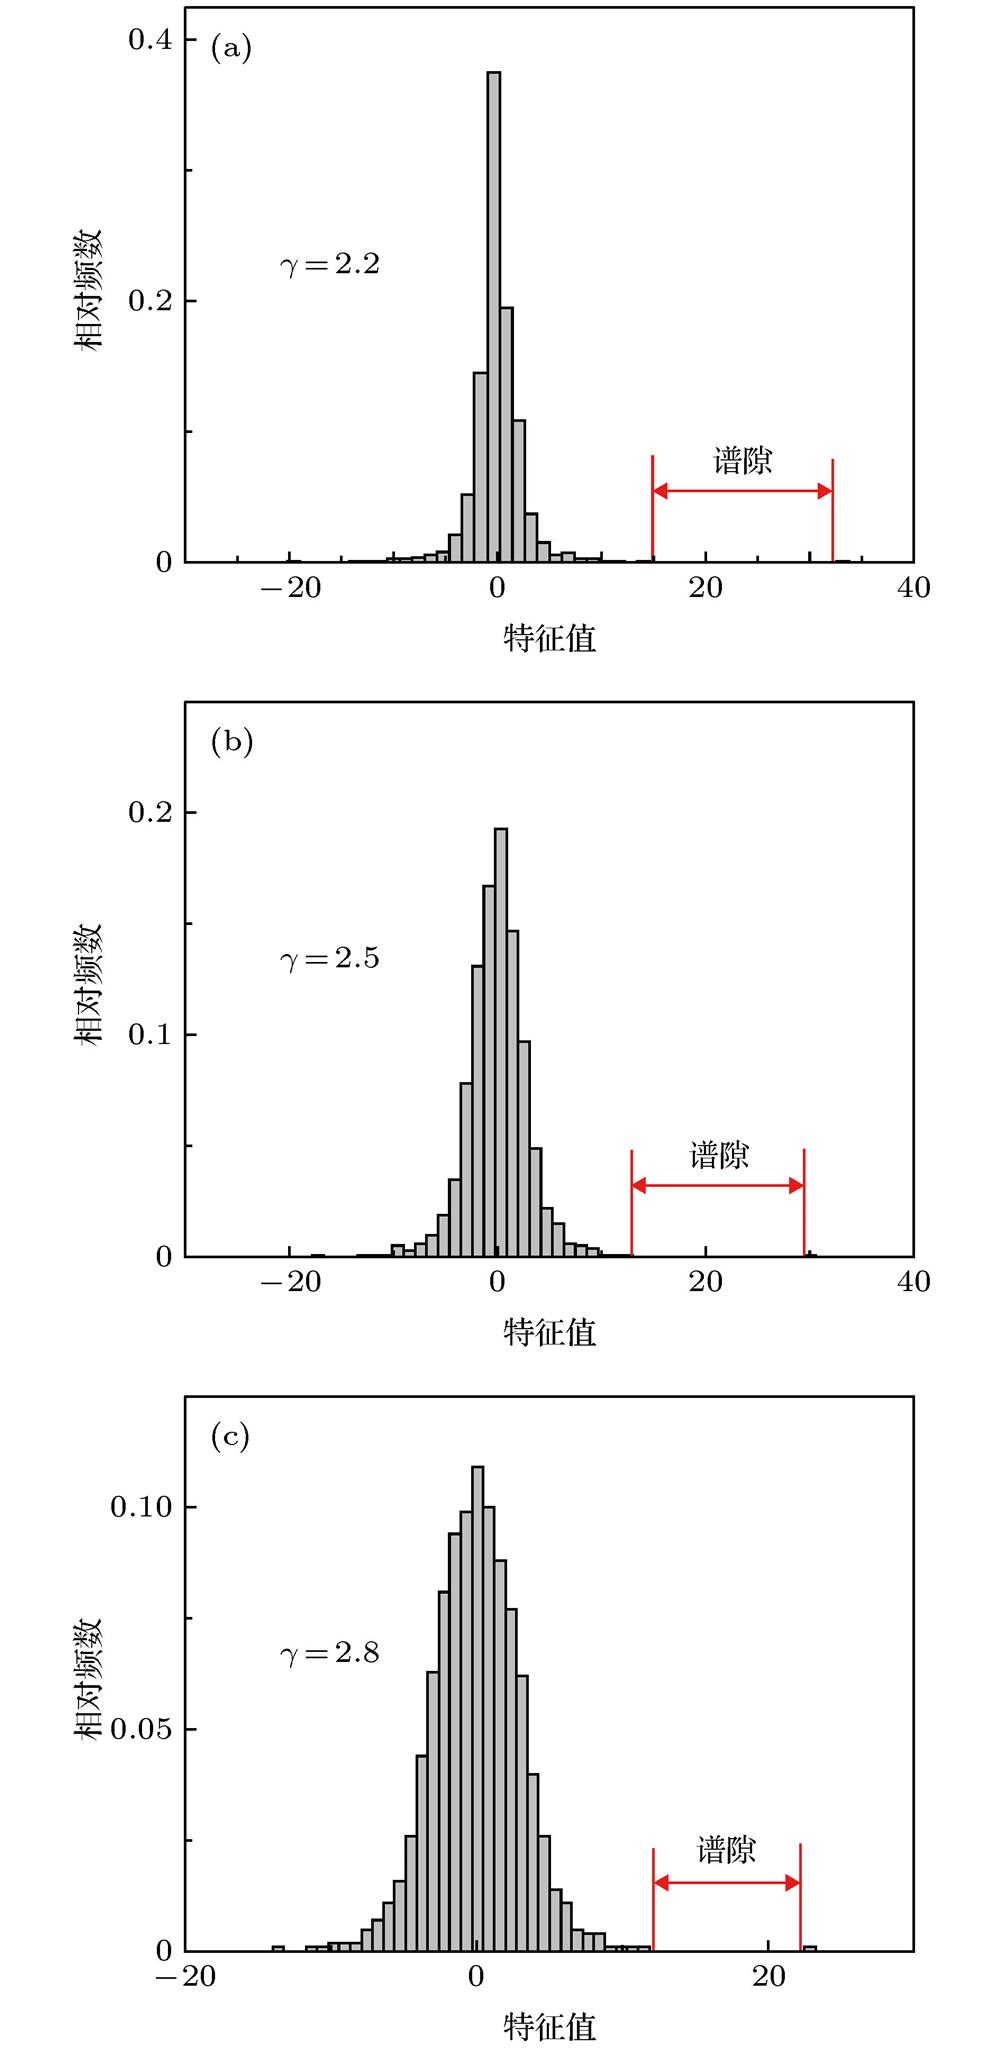 The histograms of eigenvalues of random sacle-free networks